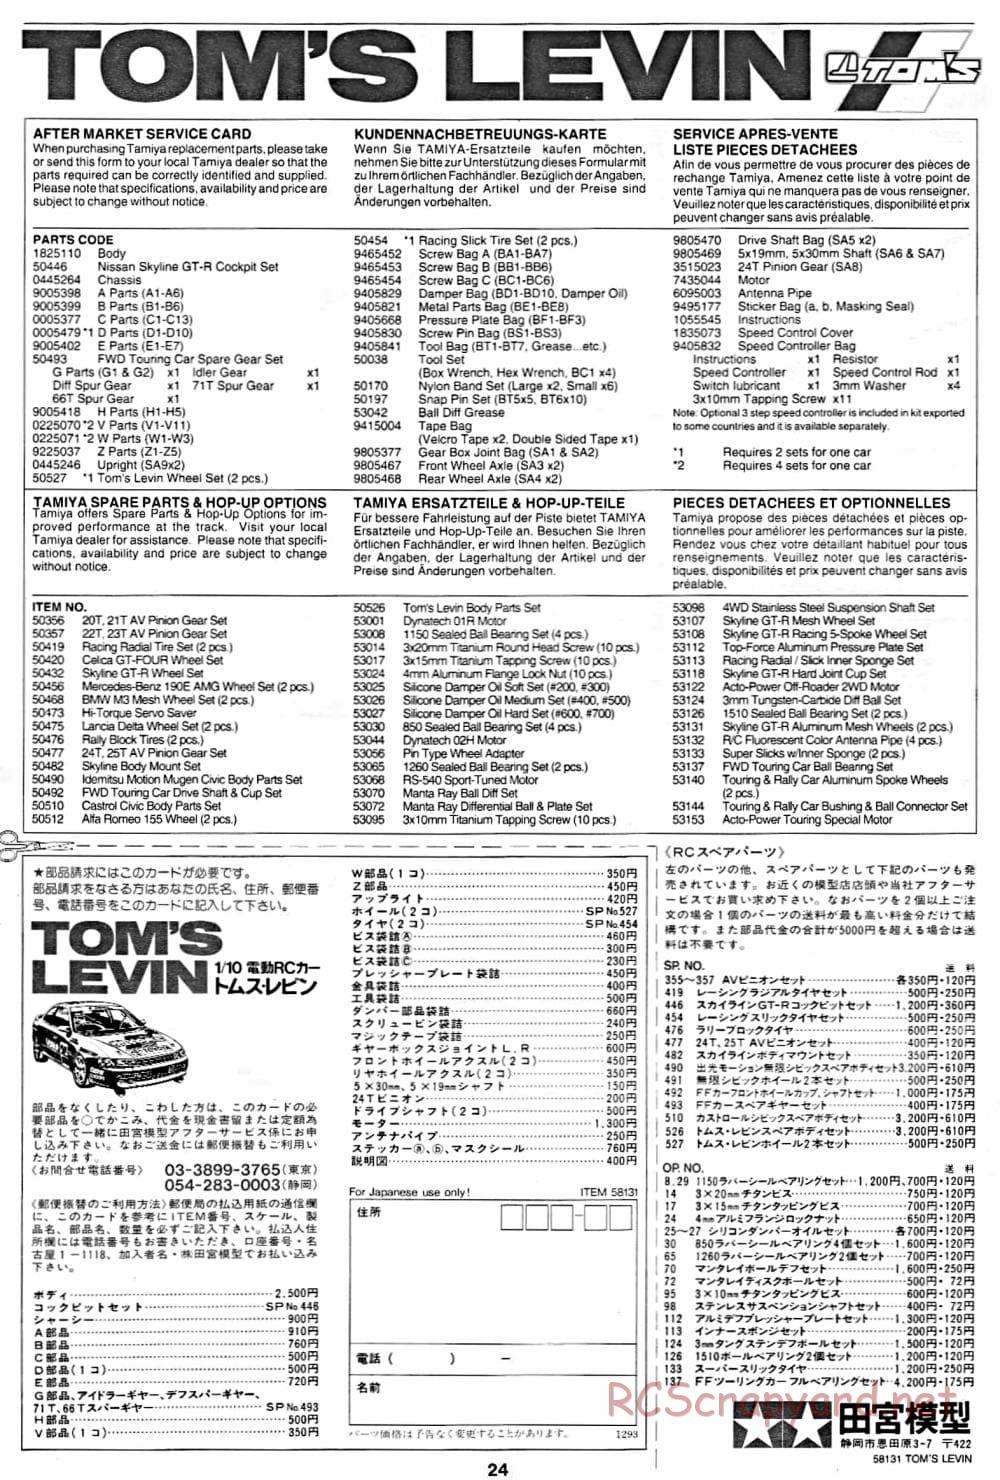 Tamiya - Toyota Tom's Levin - FF-01 Chassis - Manual - Page 24